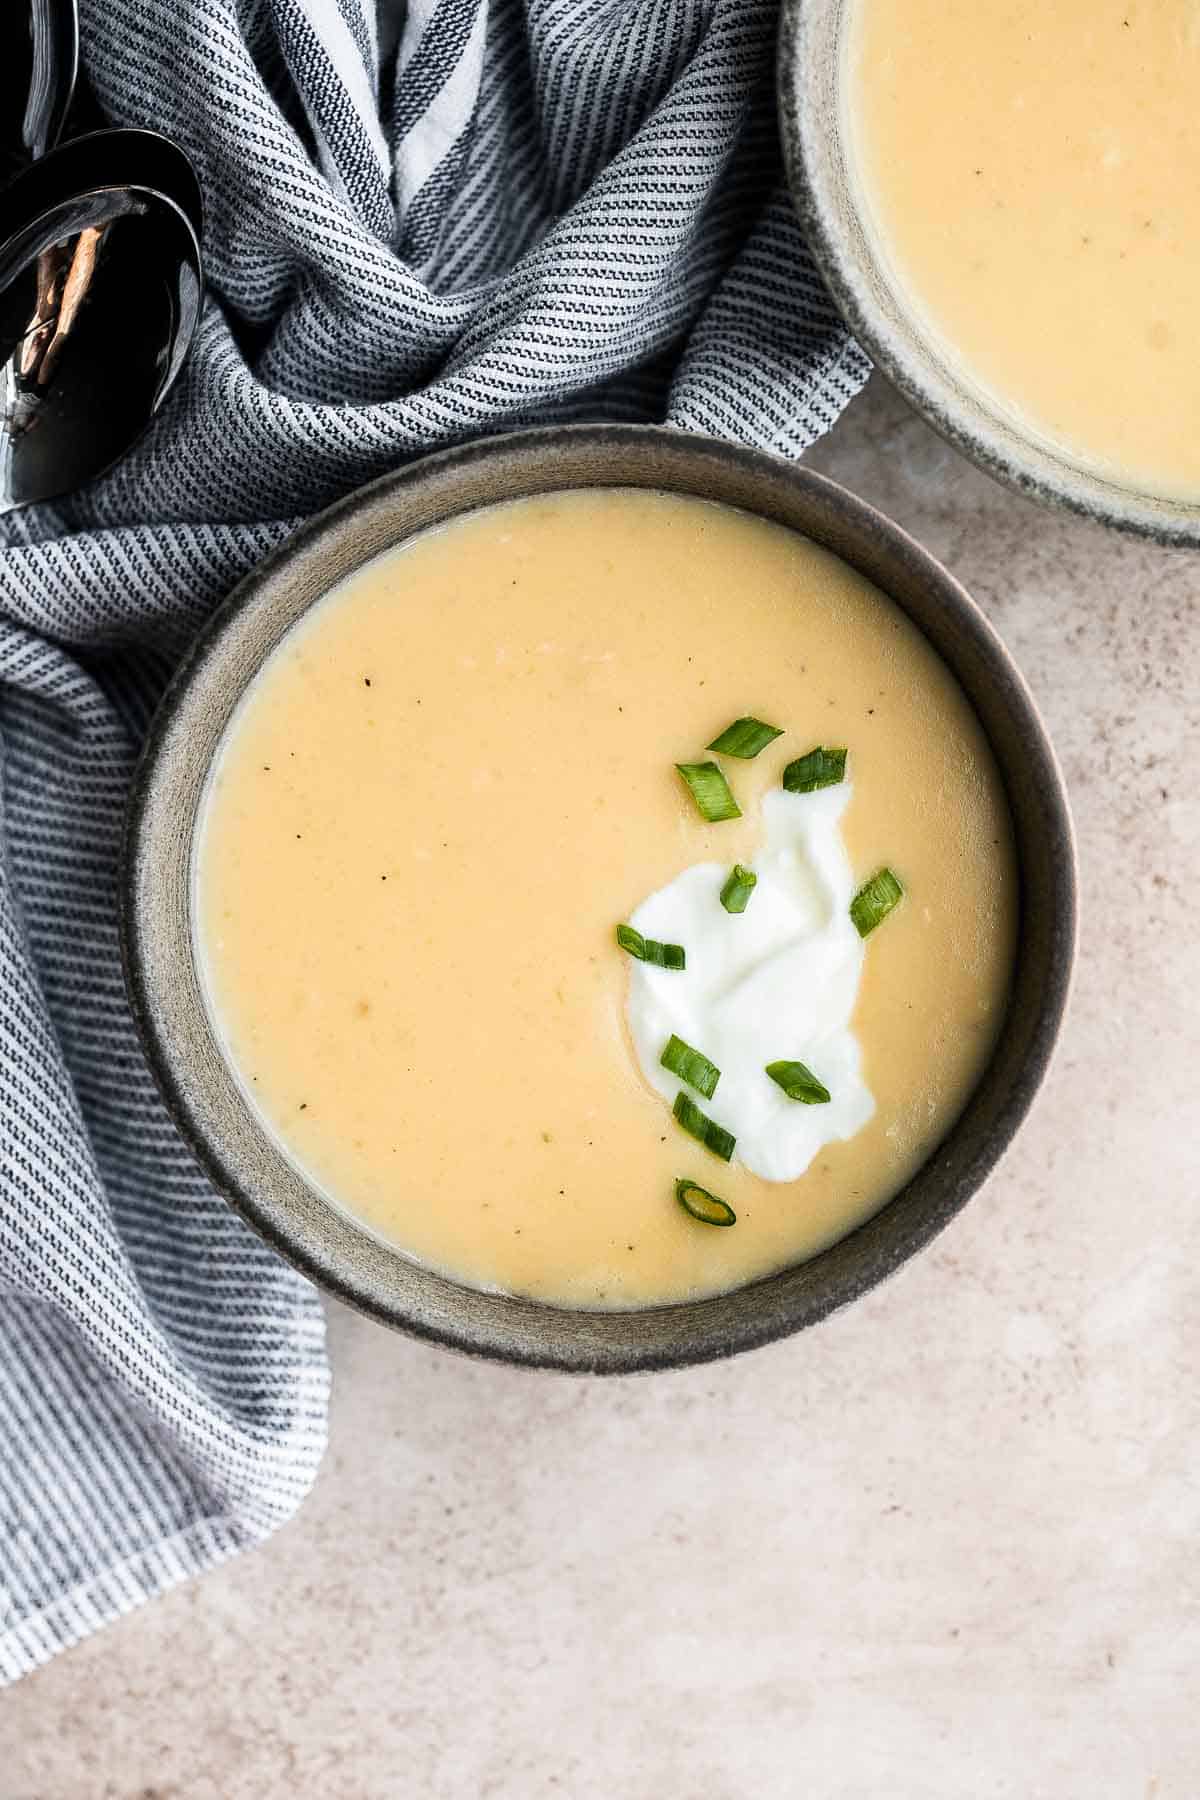 Cheesy Potato Soup is creamy, delicious, and comforting. This recipe takes everyday ingredients and transforms them in 30 minutes to a rich, luscious soup. | aheadofthyme.com